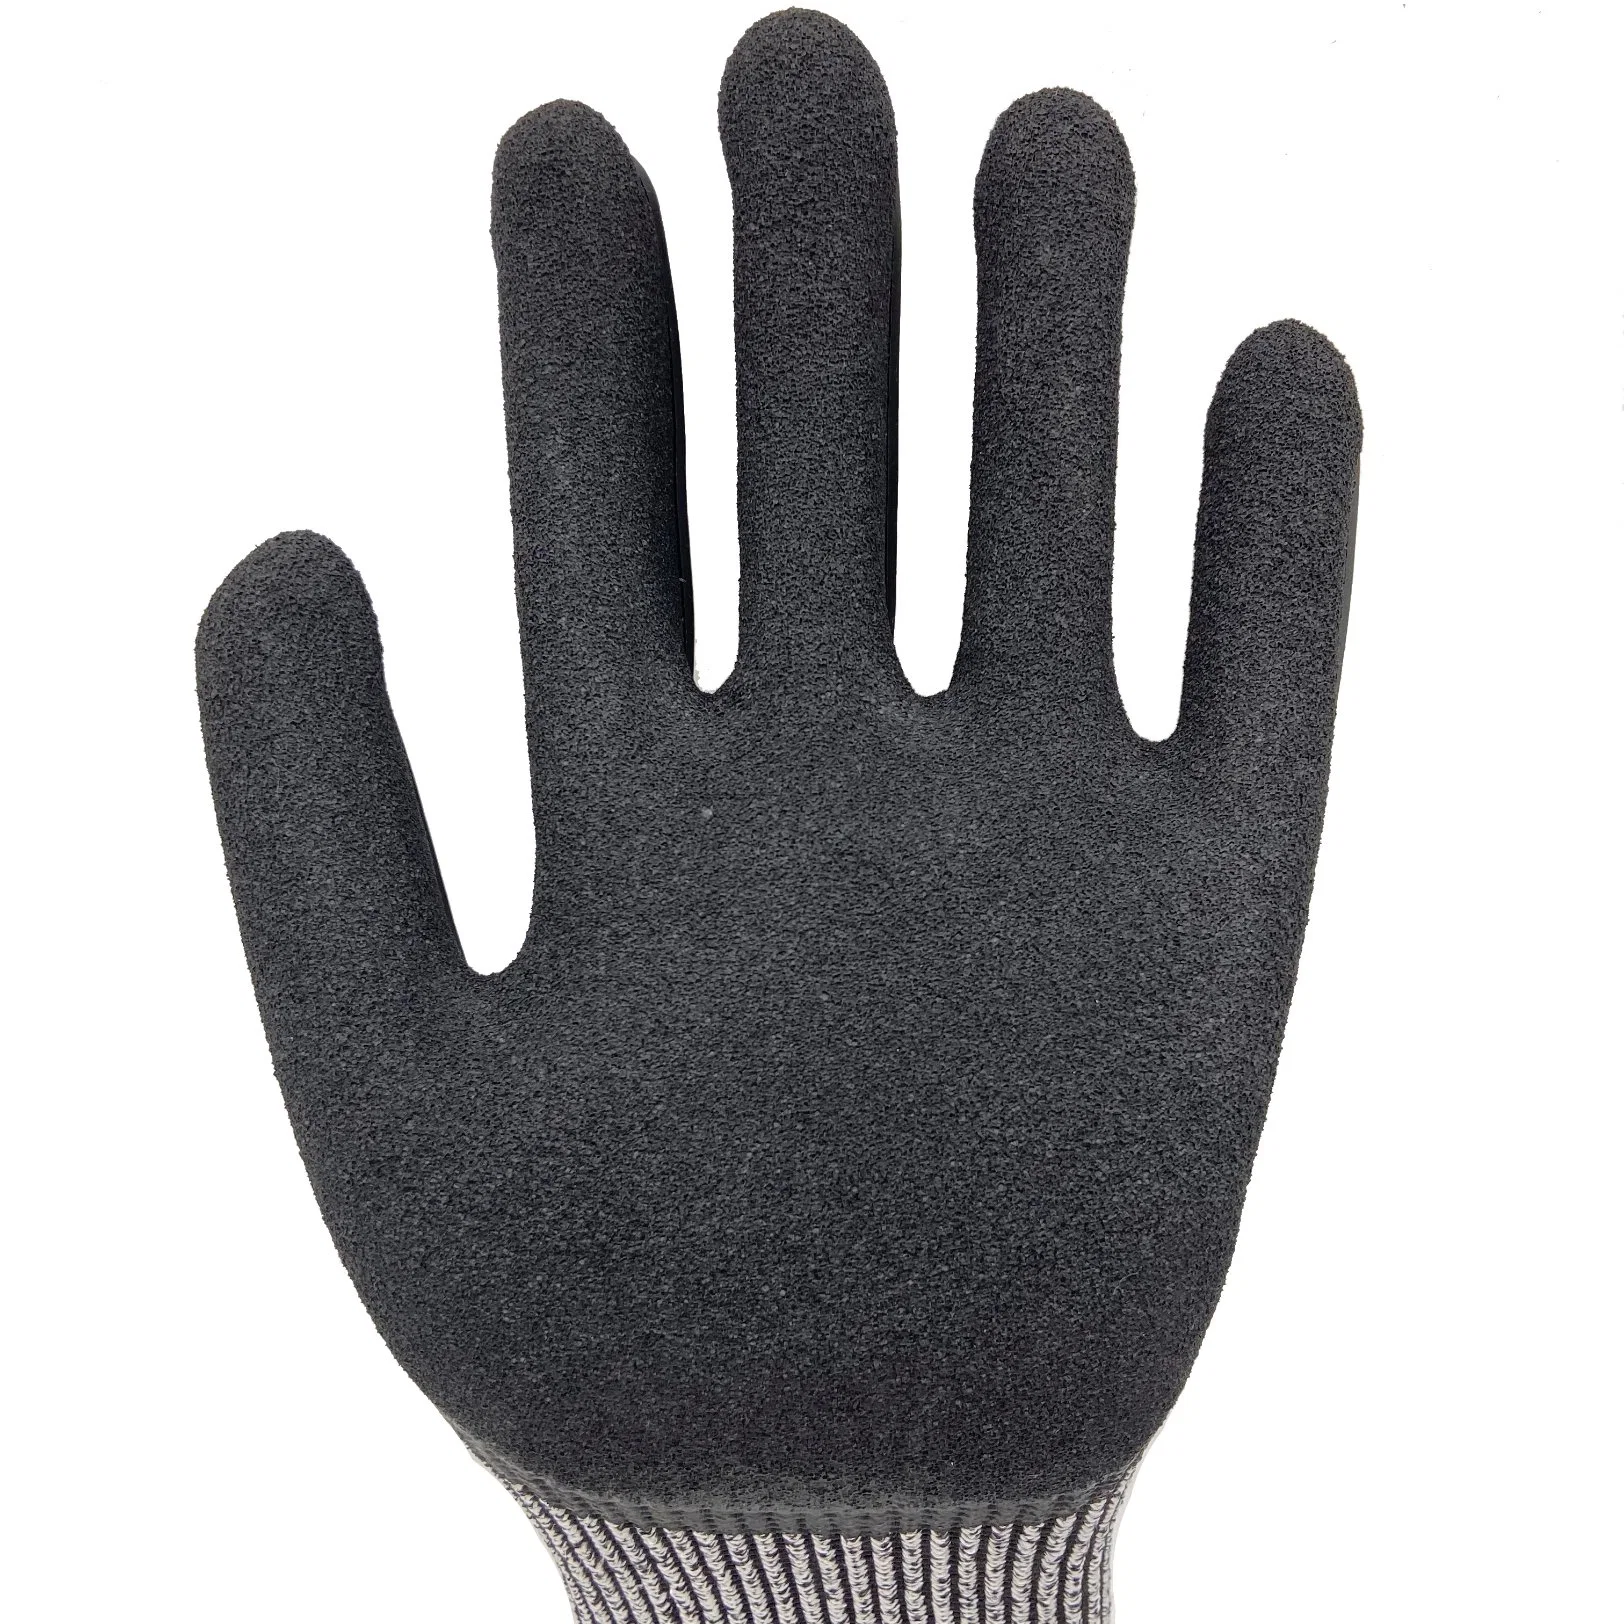 Anti-Vibration Heavy Duty Anti-Impact Cut Resistant Work Glove with TPR